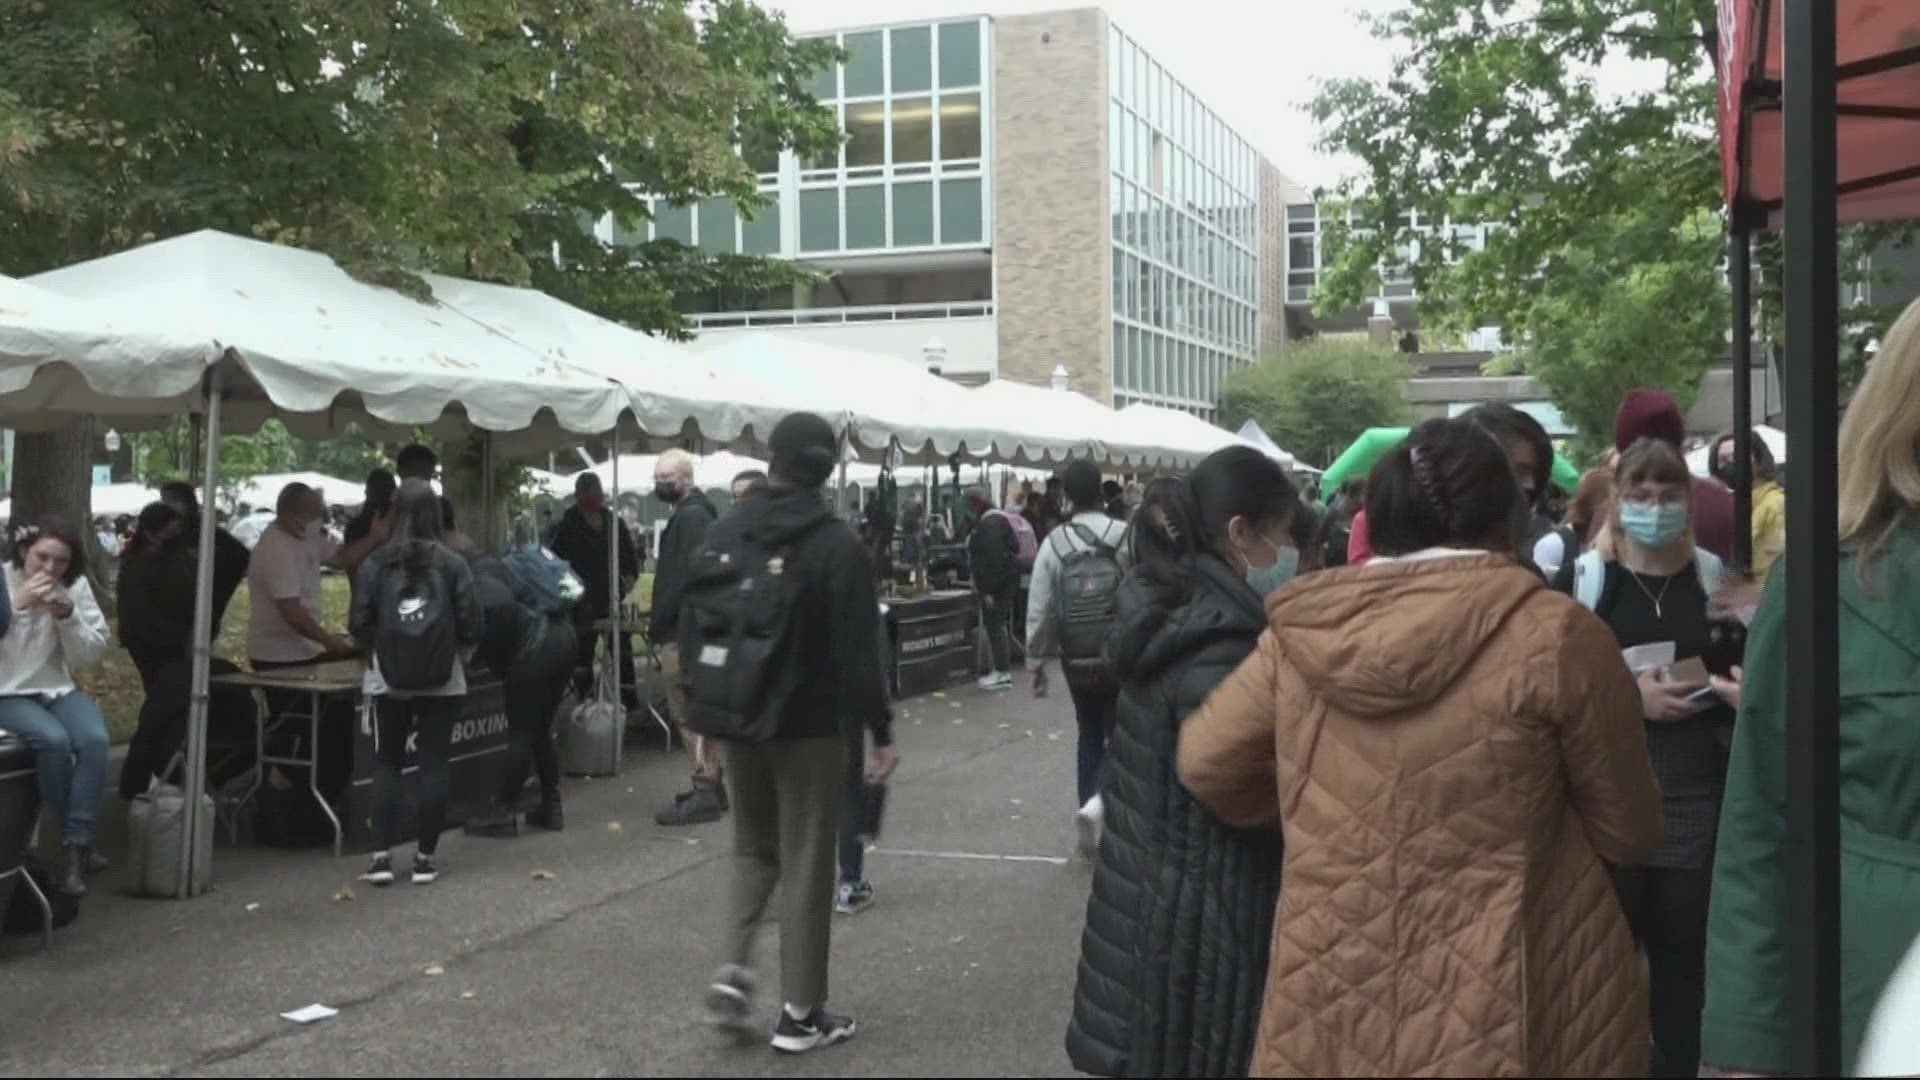 Portland State University and the City of Portland are teaming up to bring downtown back to life. KGW's Christelle Koumoue reports.